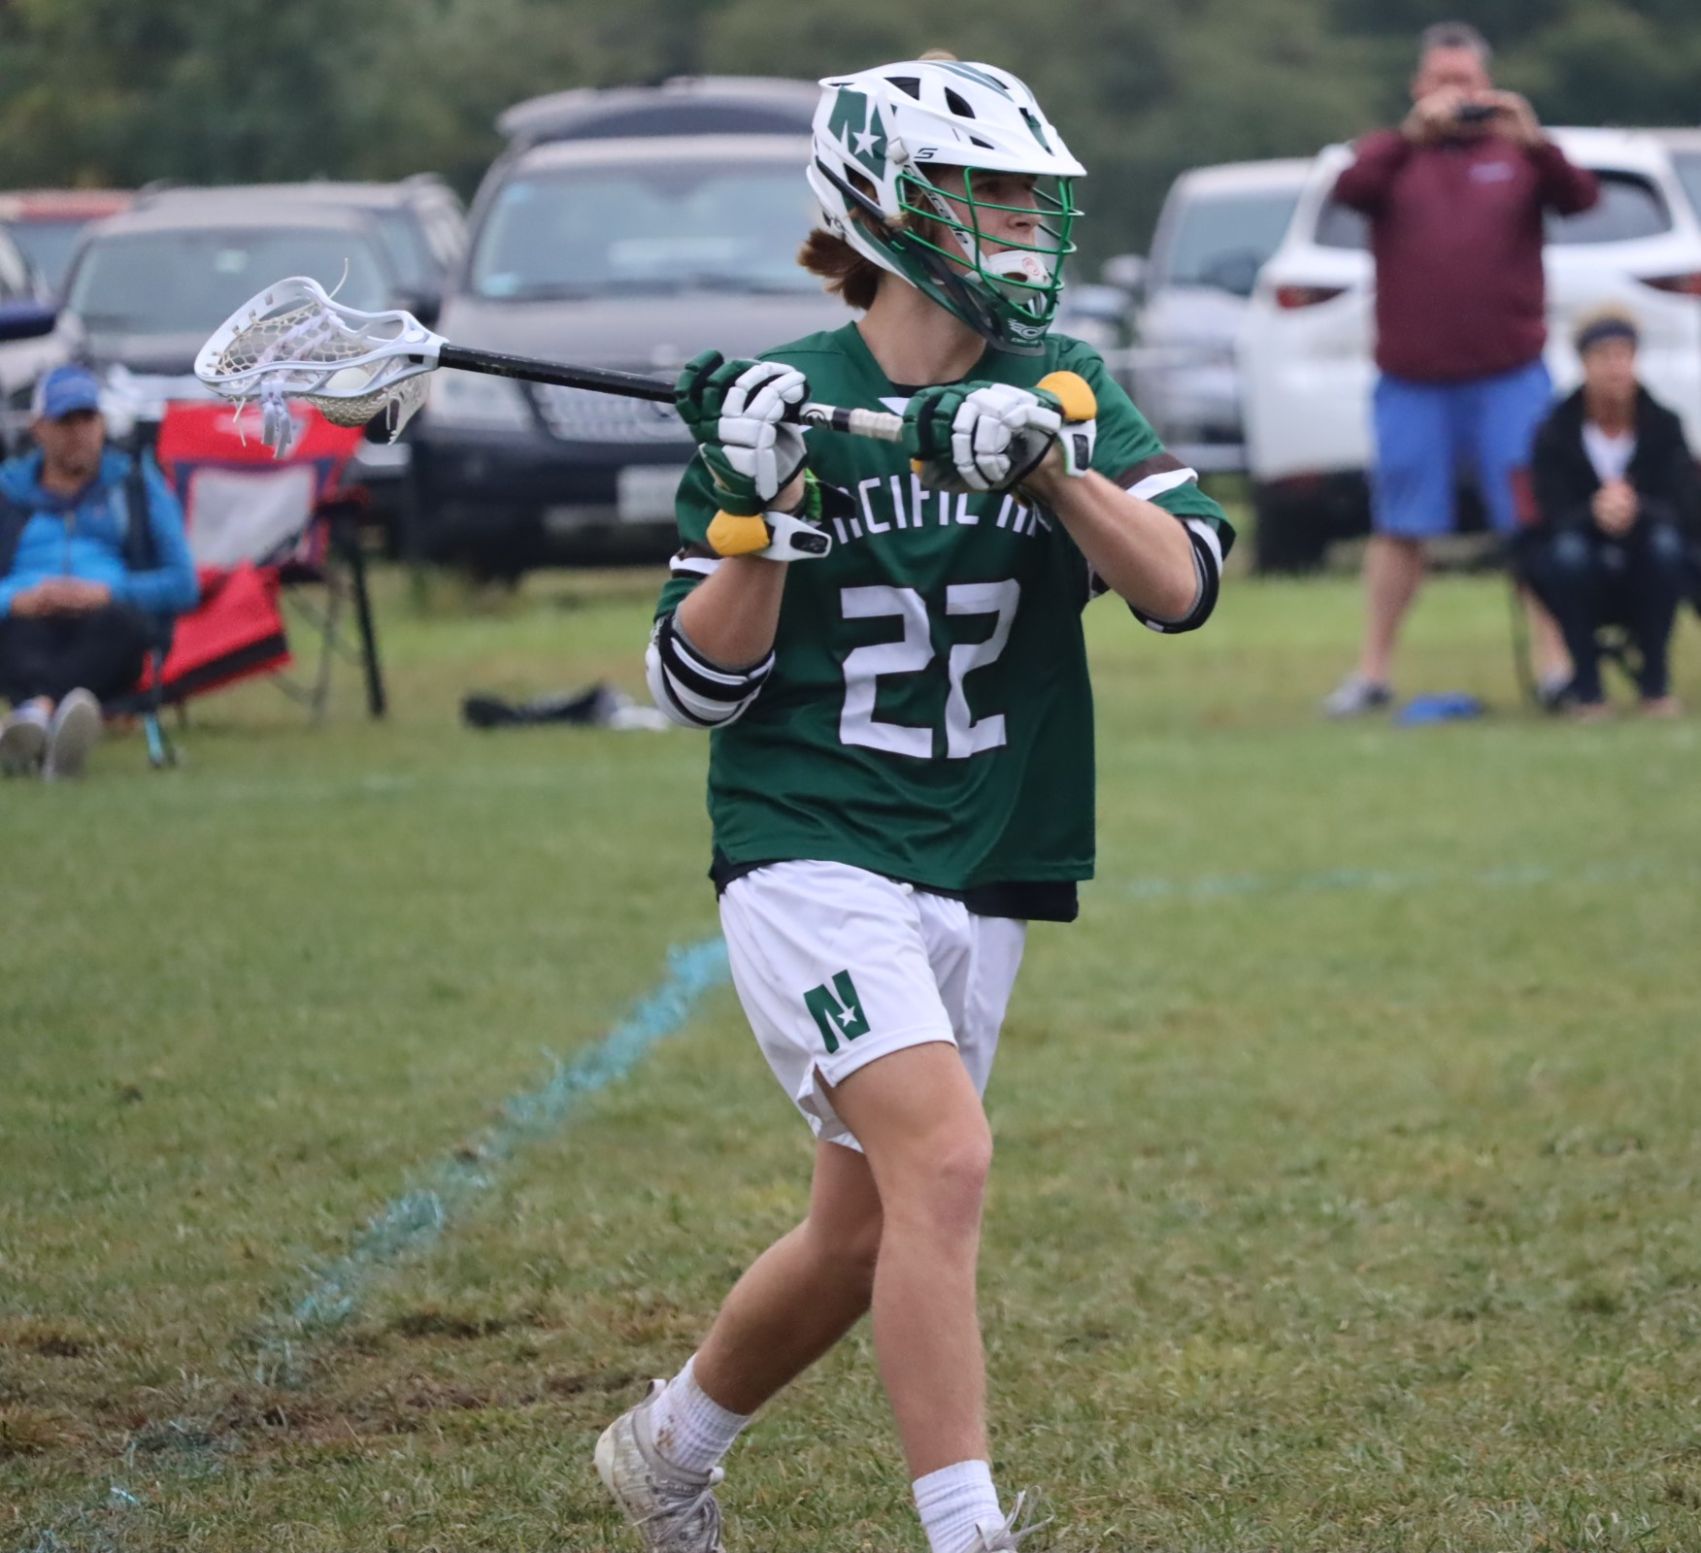 Charlie Iler, 2022 Standout Lacrosse Player at The National All Star Games